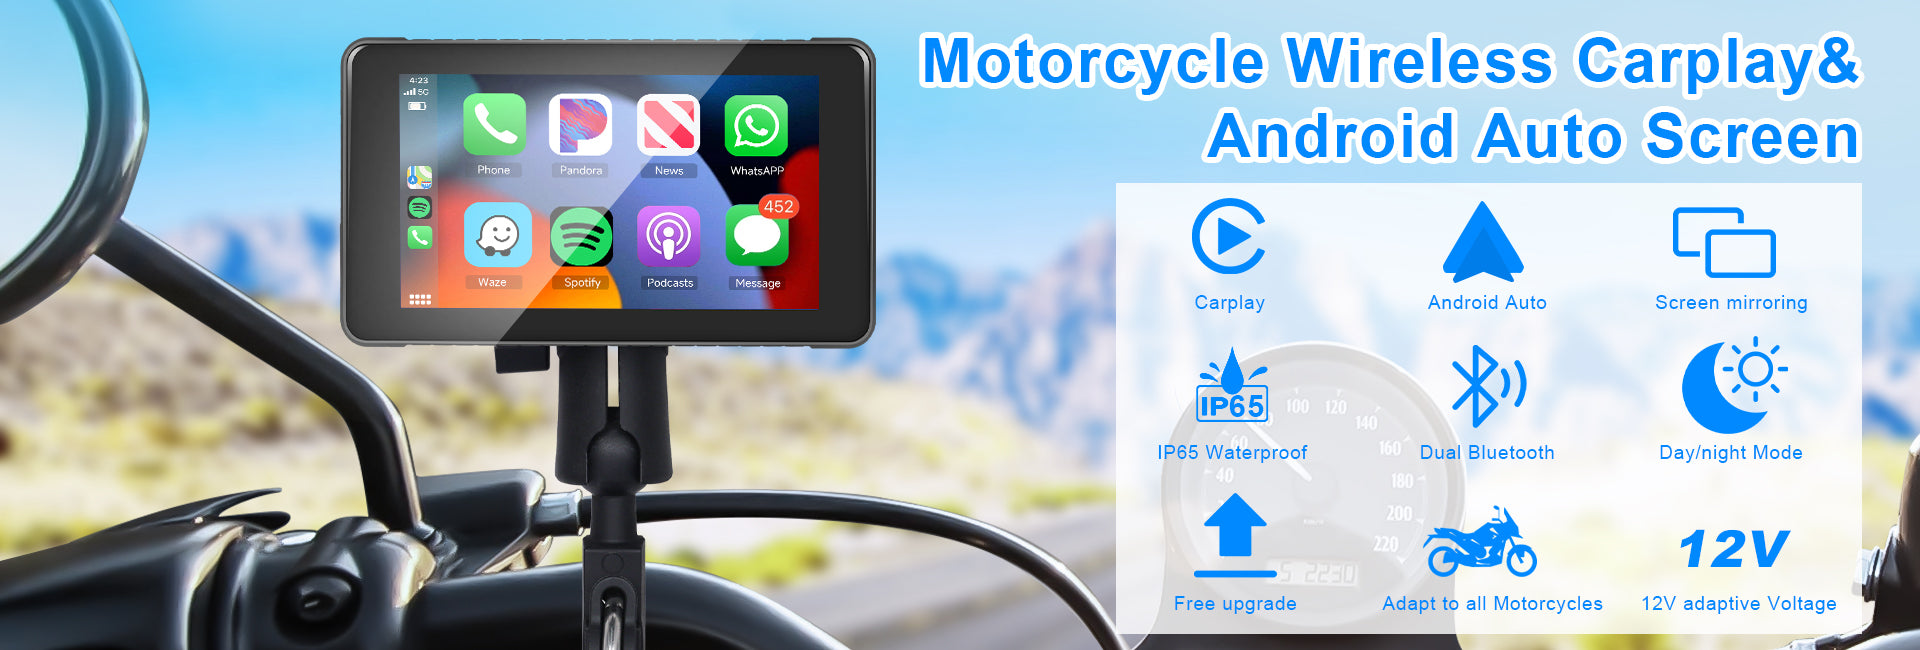 Podofo 5-inch Motorcycle GPS Wireless Carplay Android Auto Screen IP65 Waterprrof screen, Dual Bluetooth Connectivity, TF/Type-C for Software Upgrade